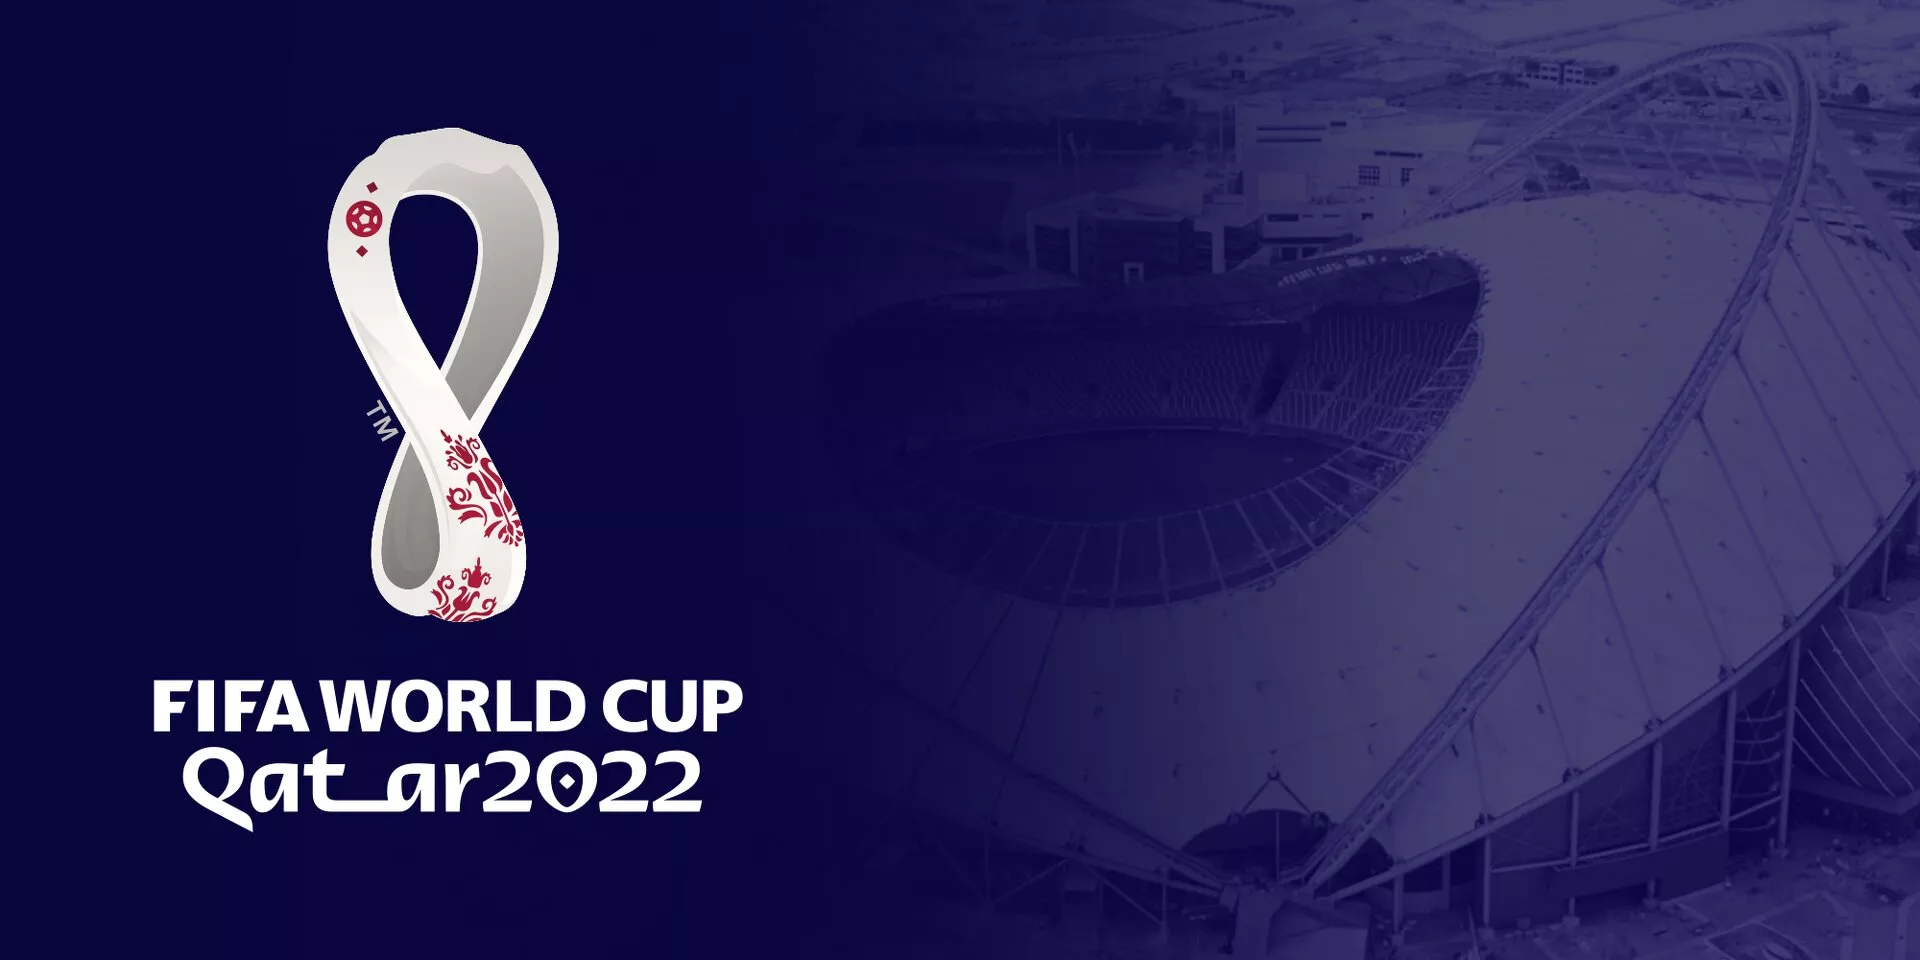 Where and how to watch FIFA World Cup 2022 in Ghana?